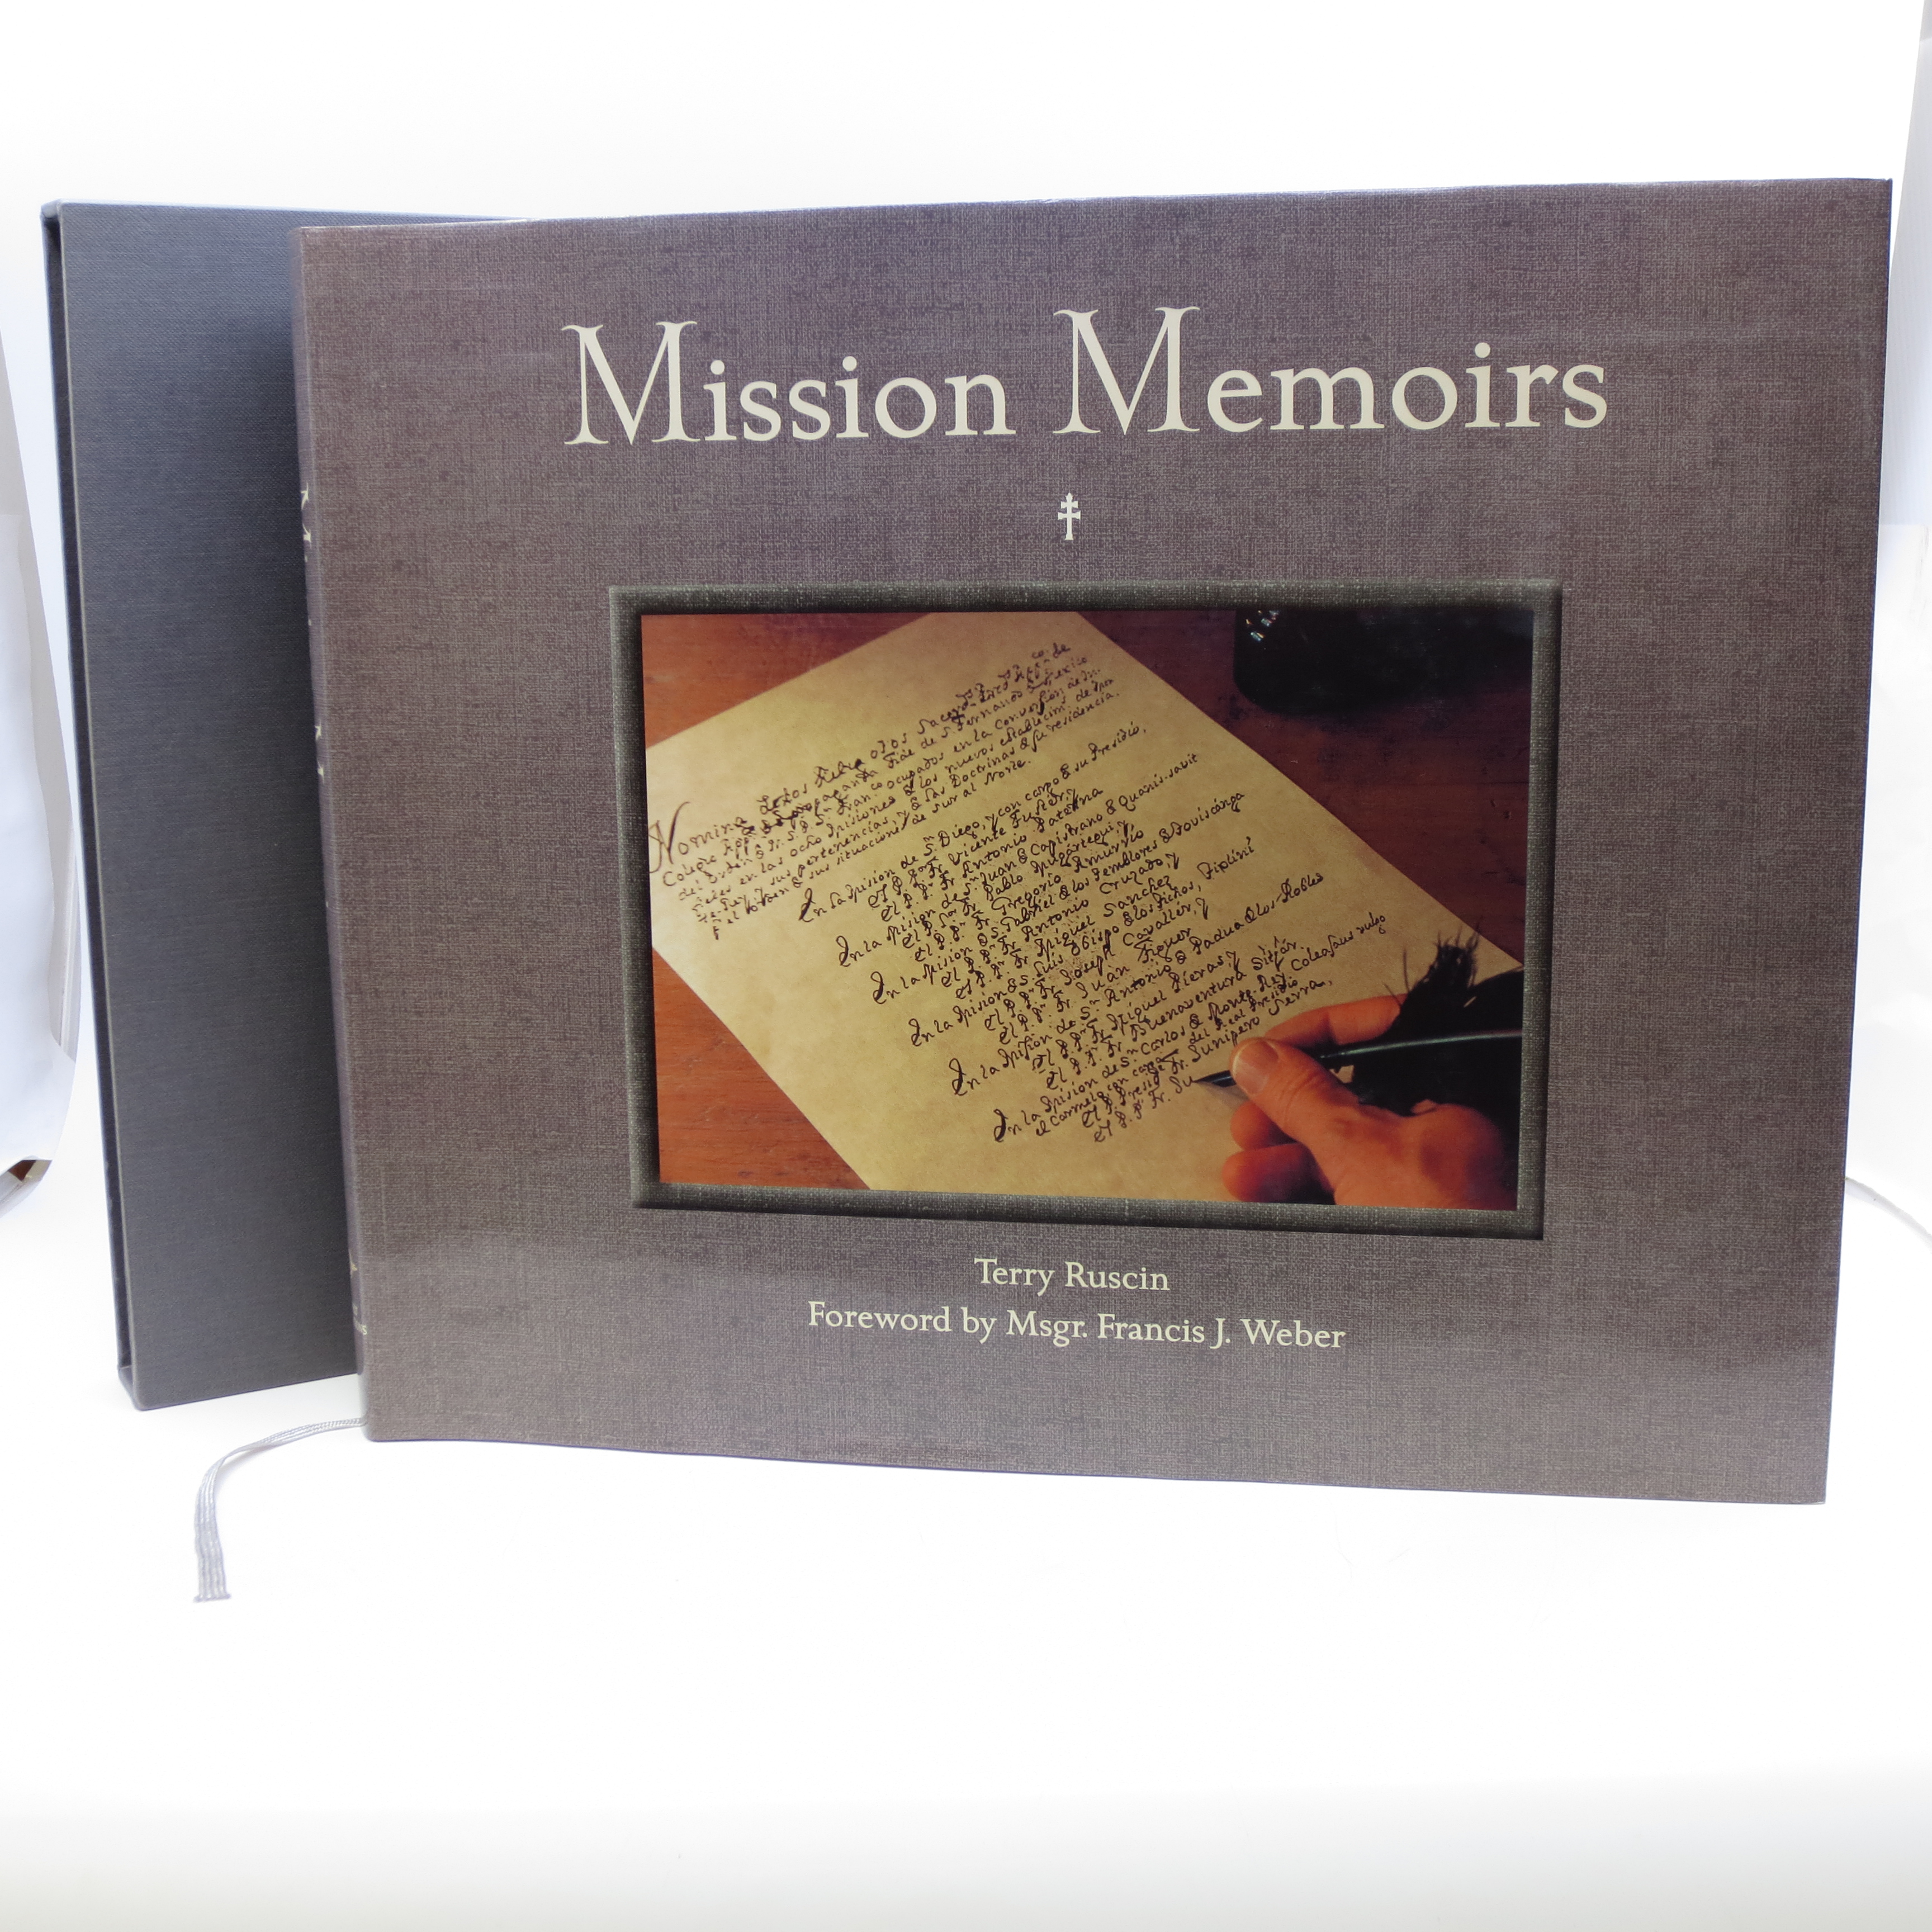 Mission Memoirs: A Collection of Photographs, Sketches & Reflections of California's Past (LIMITED, NUMBERED FIRST EDITION. FROM THE LIBRARY OF TERRY RUSCIN) - Terry Ruscin (Author); Sue Diaz (Francis J. Weber (Forward)